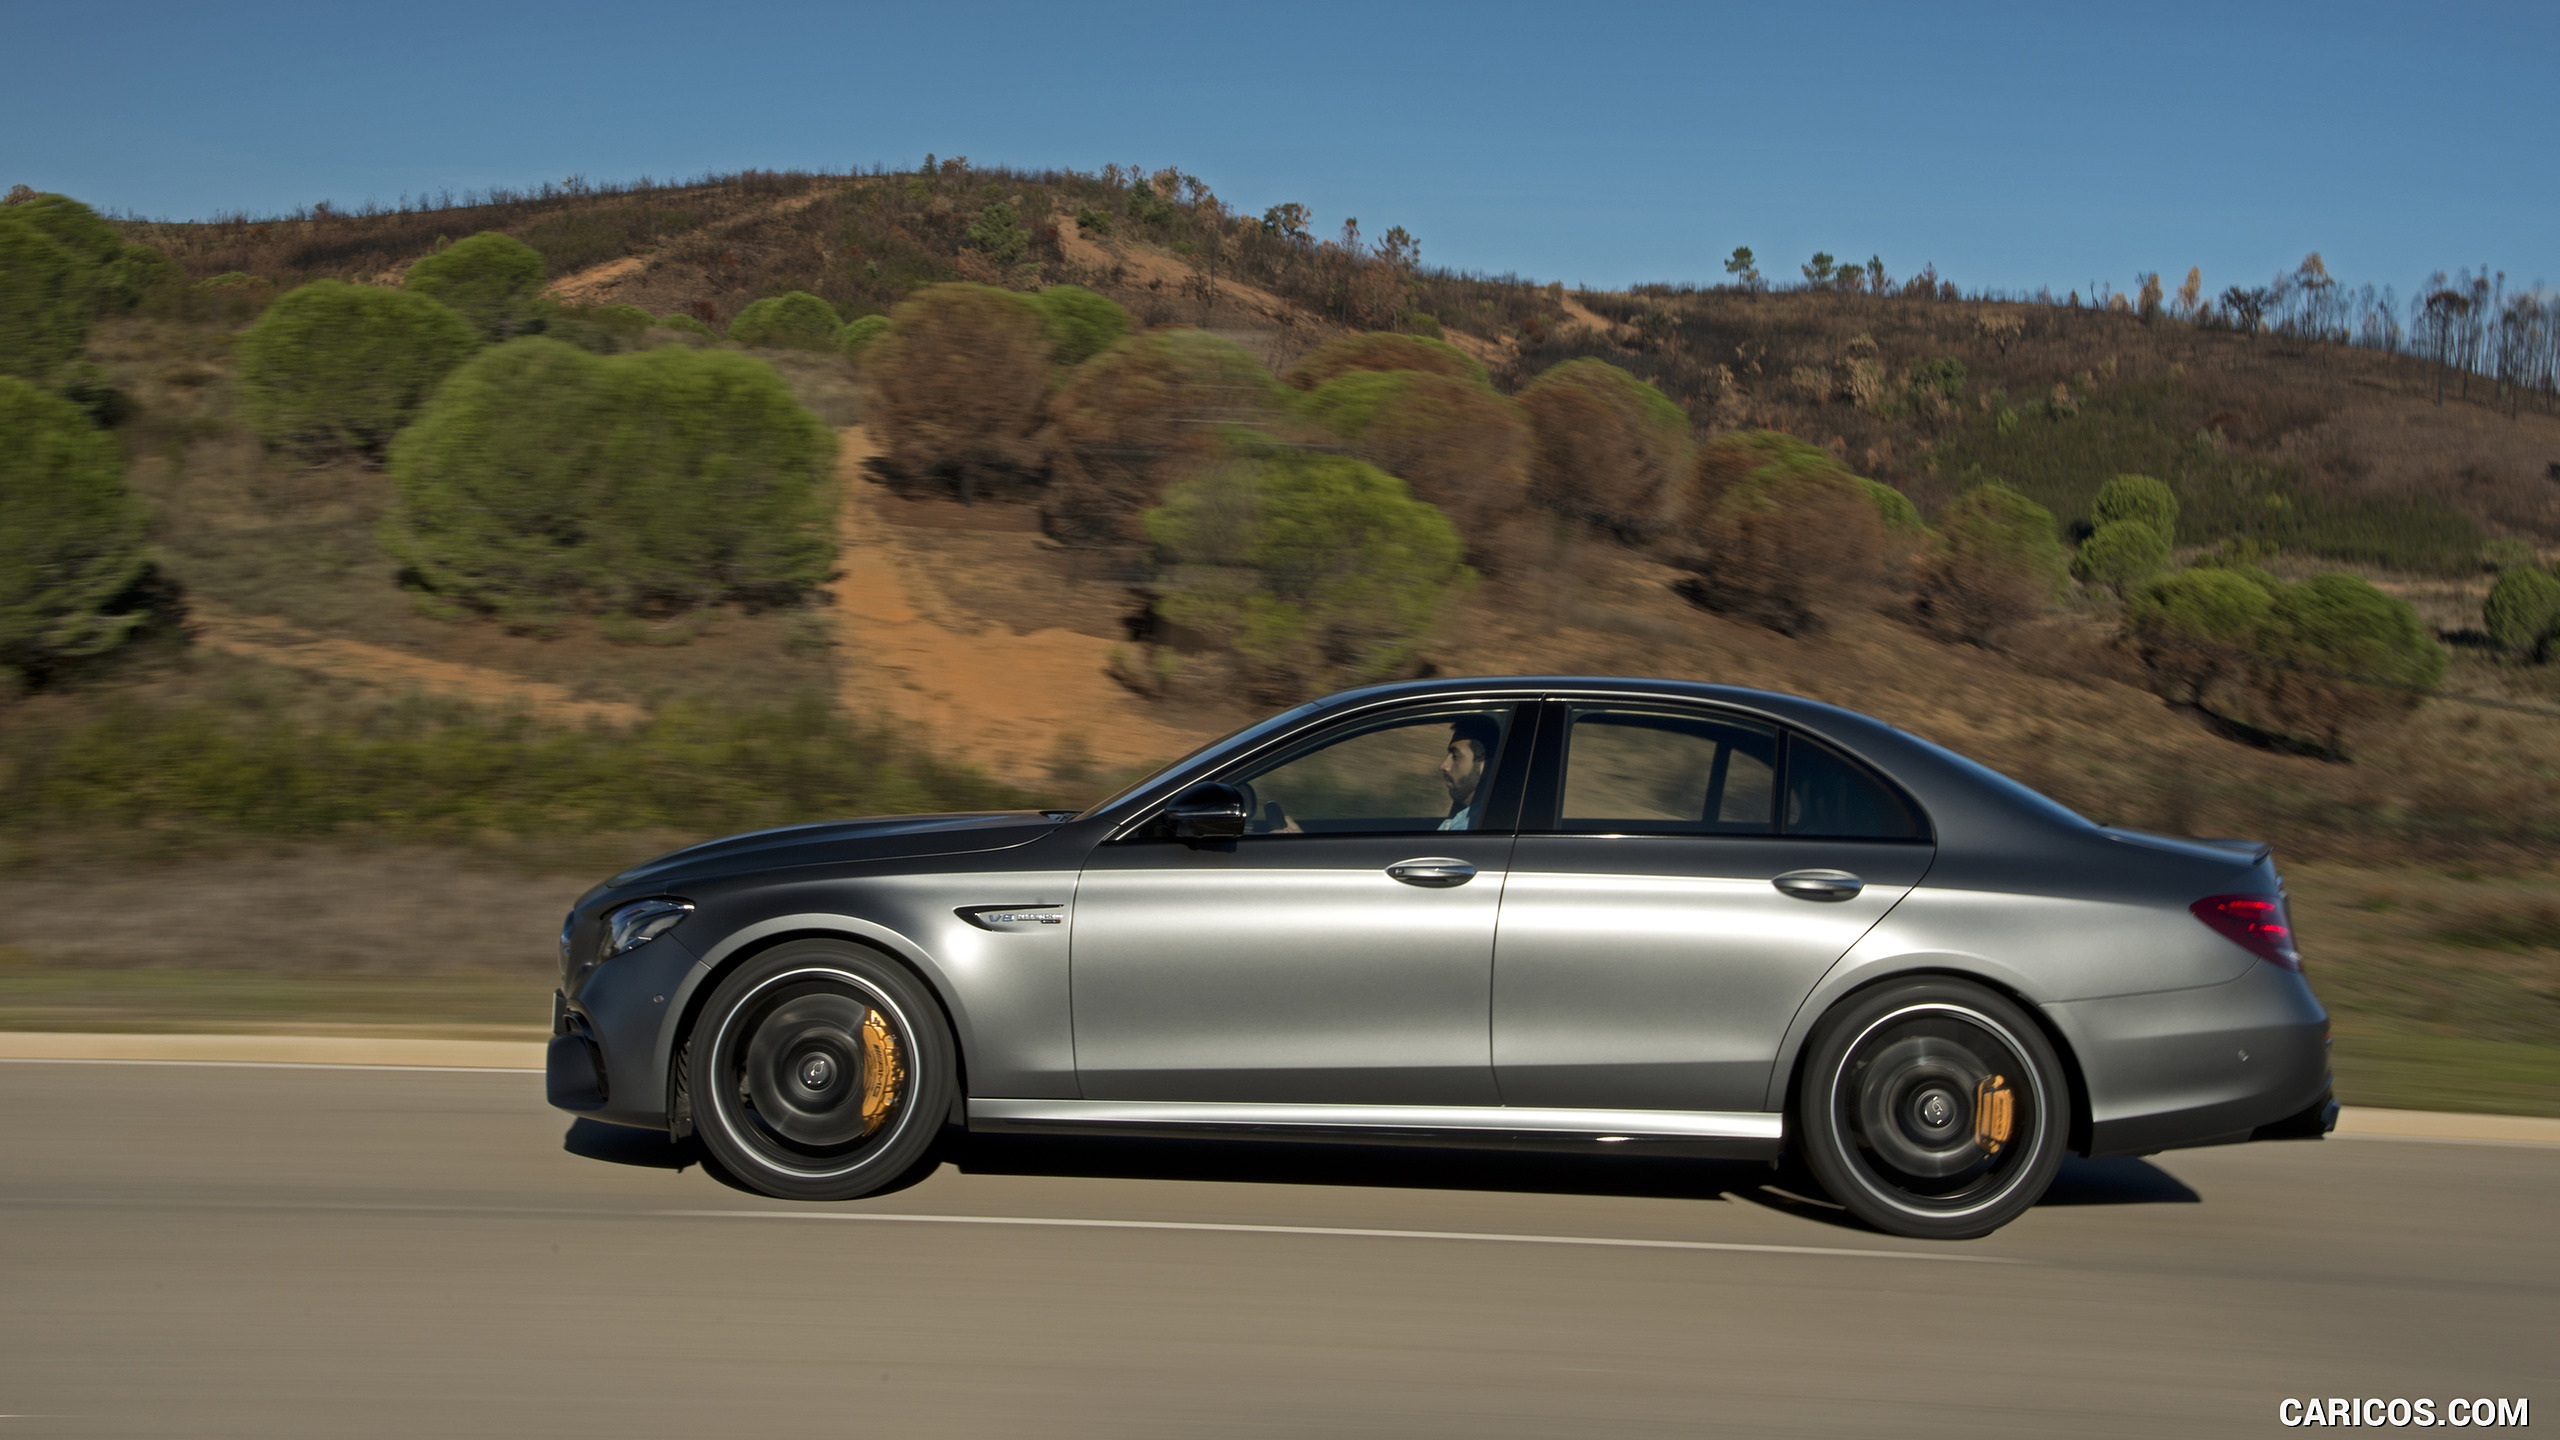 2018 Mercedes-AMG E63 S 4MATIC+ - Side, #293 of 323